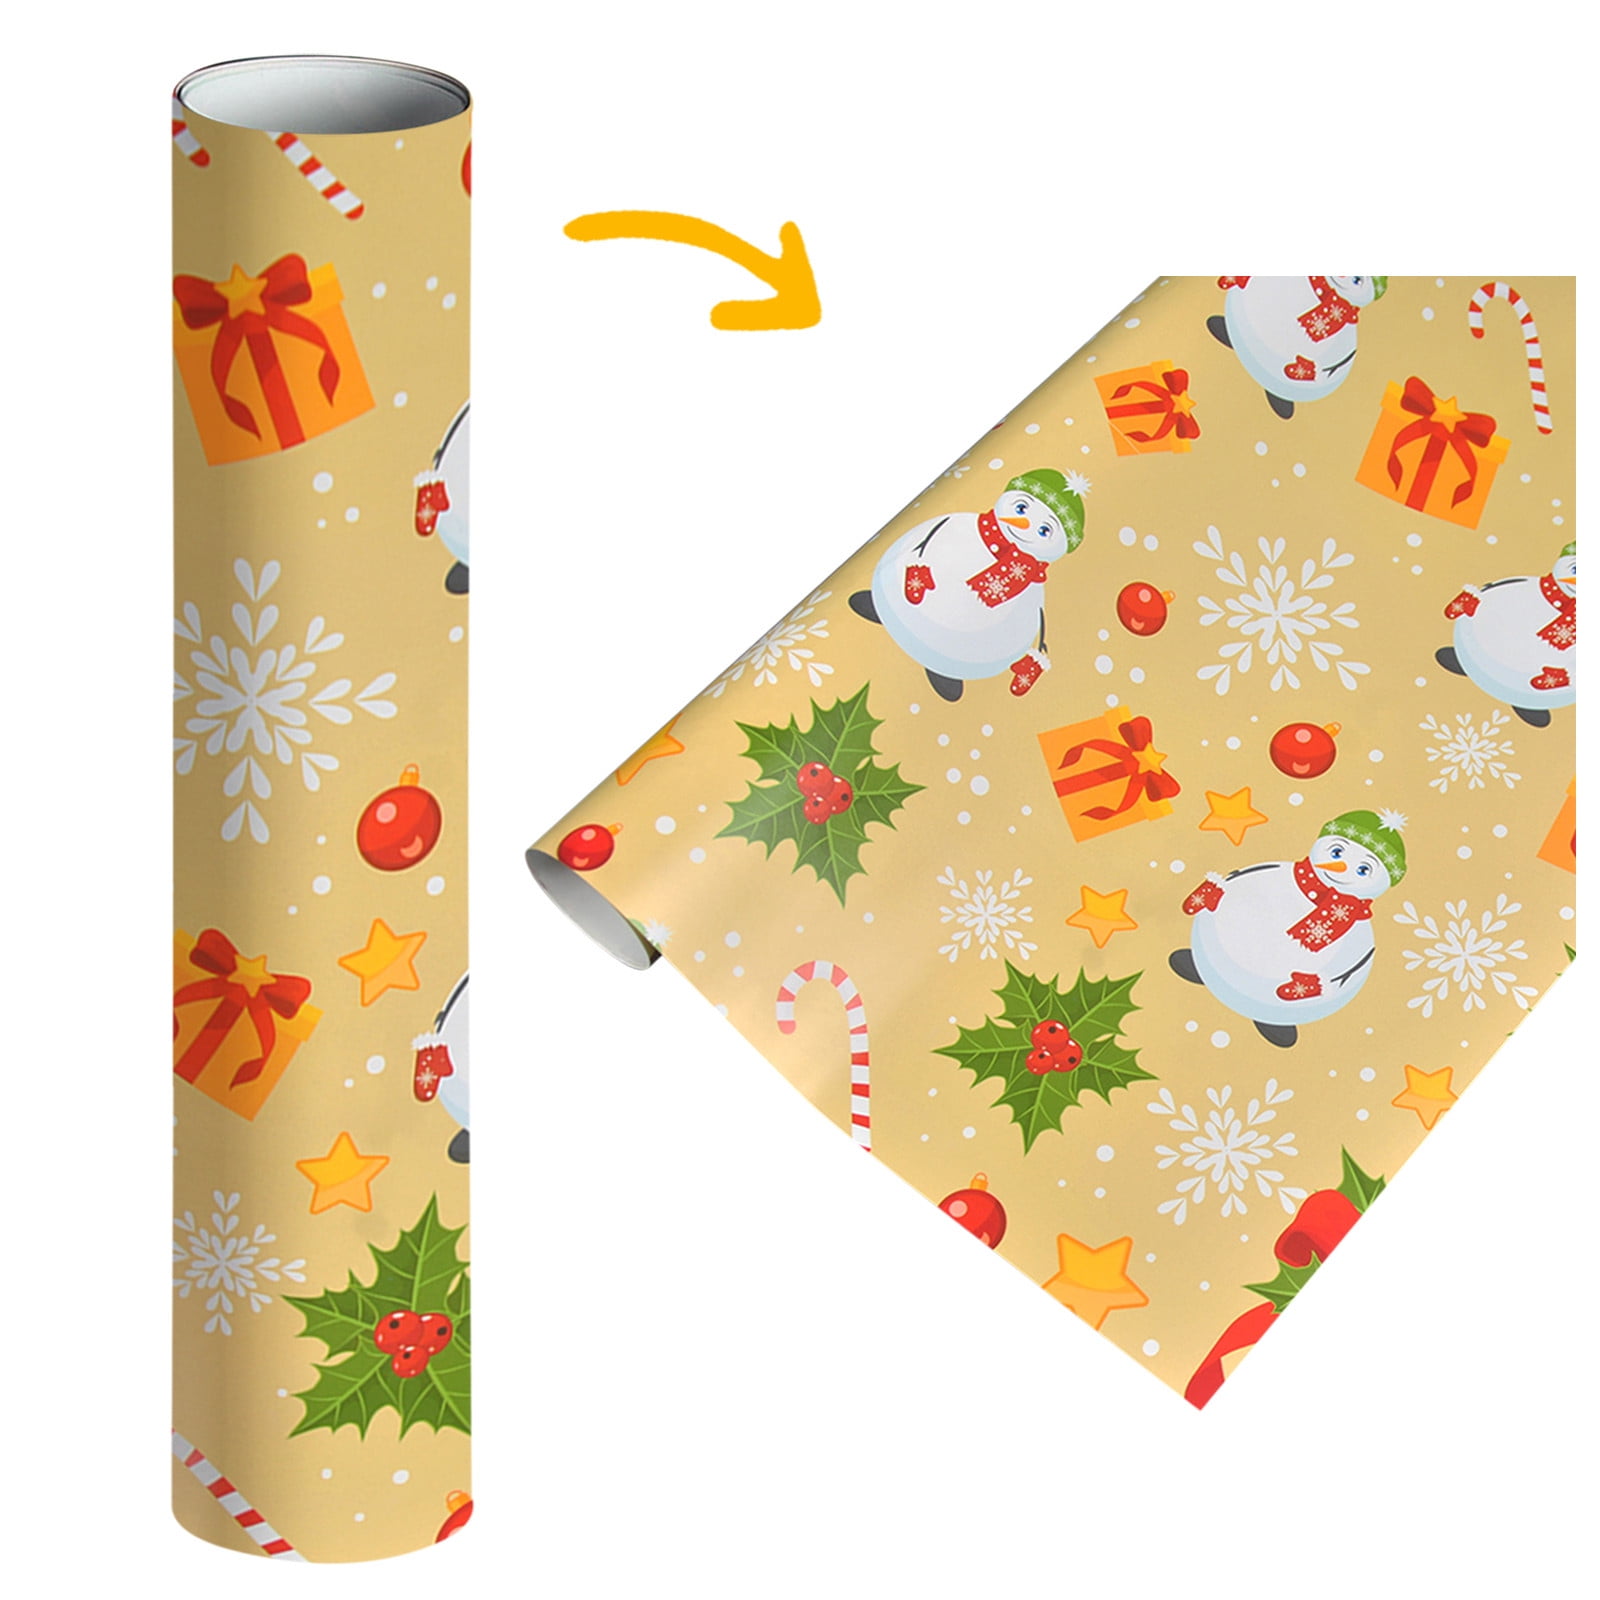 Floral Wrapping Paper Roll Bundle (12.5 sq ft per roll, 75 total